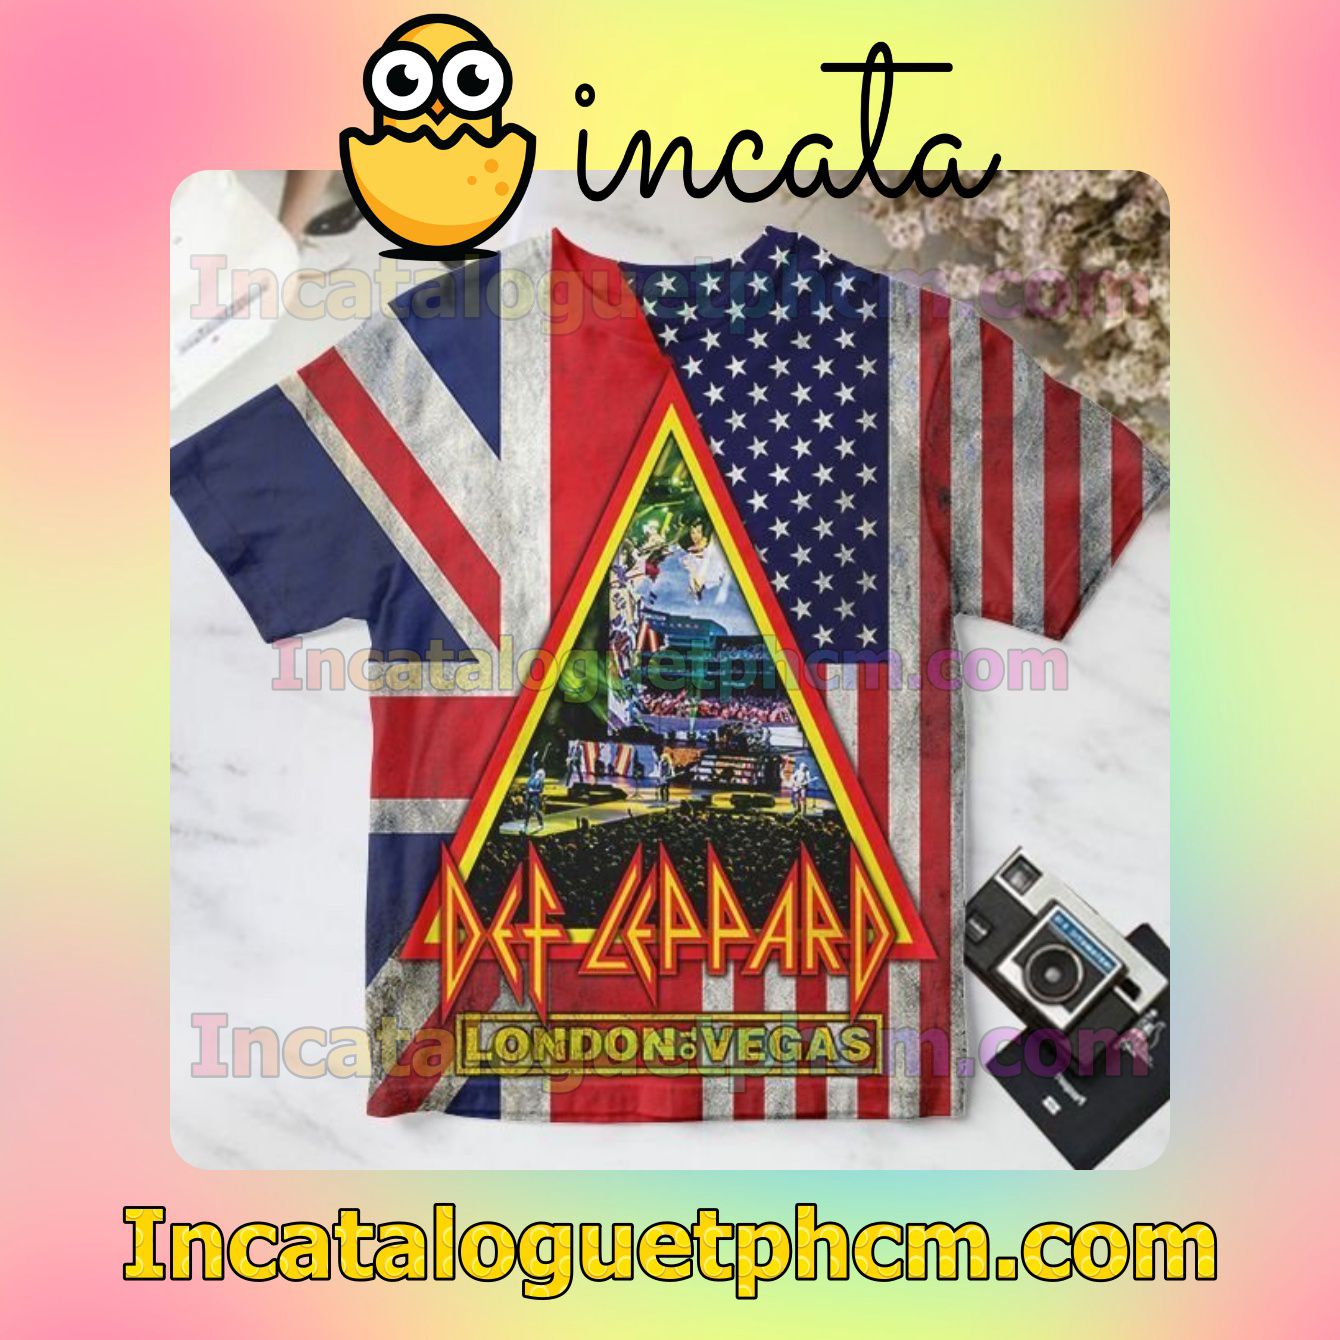 Def Leppard London To Vegas Album Cover Personalized Shirt